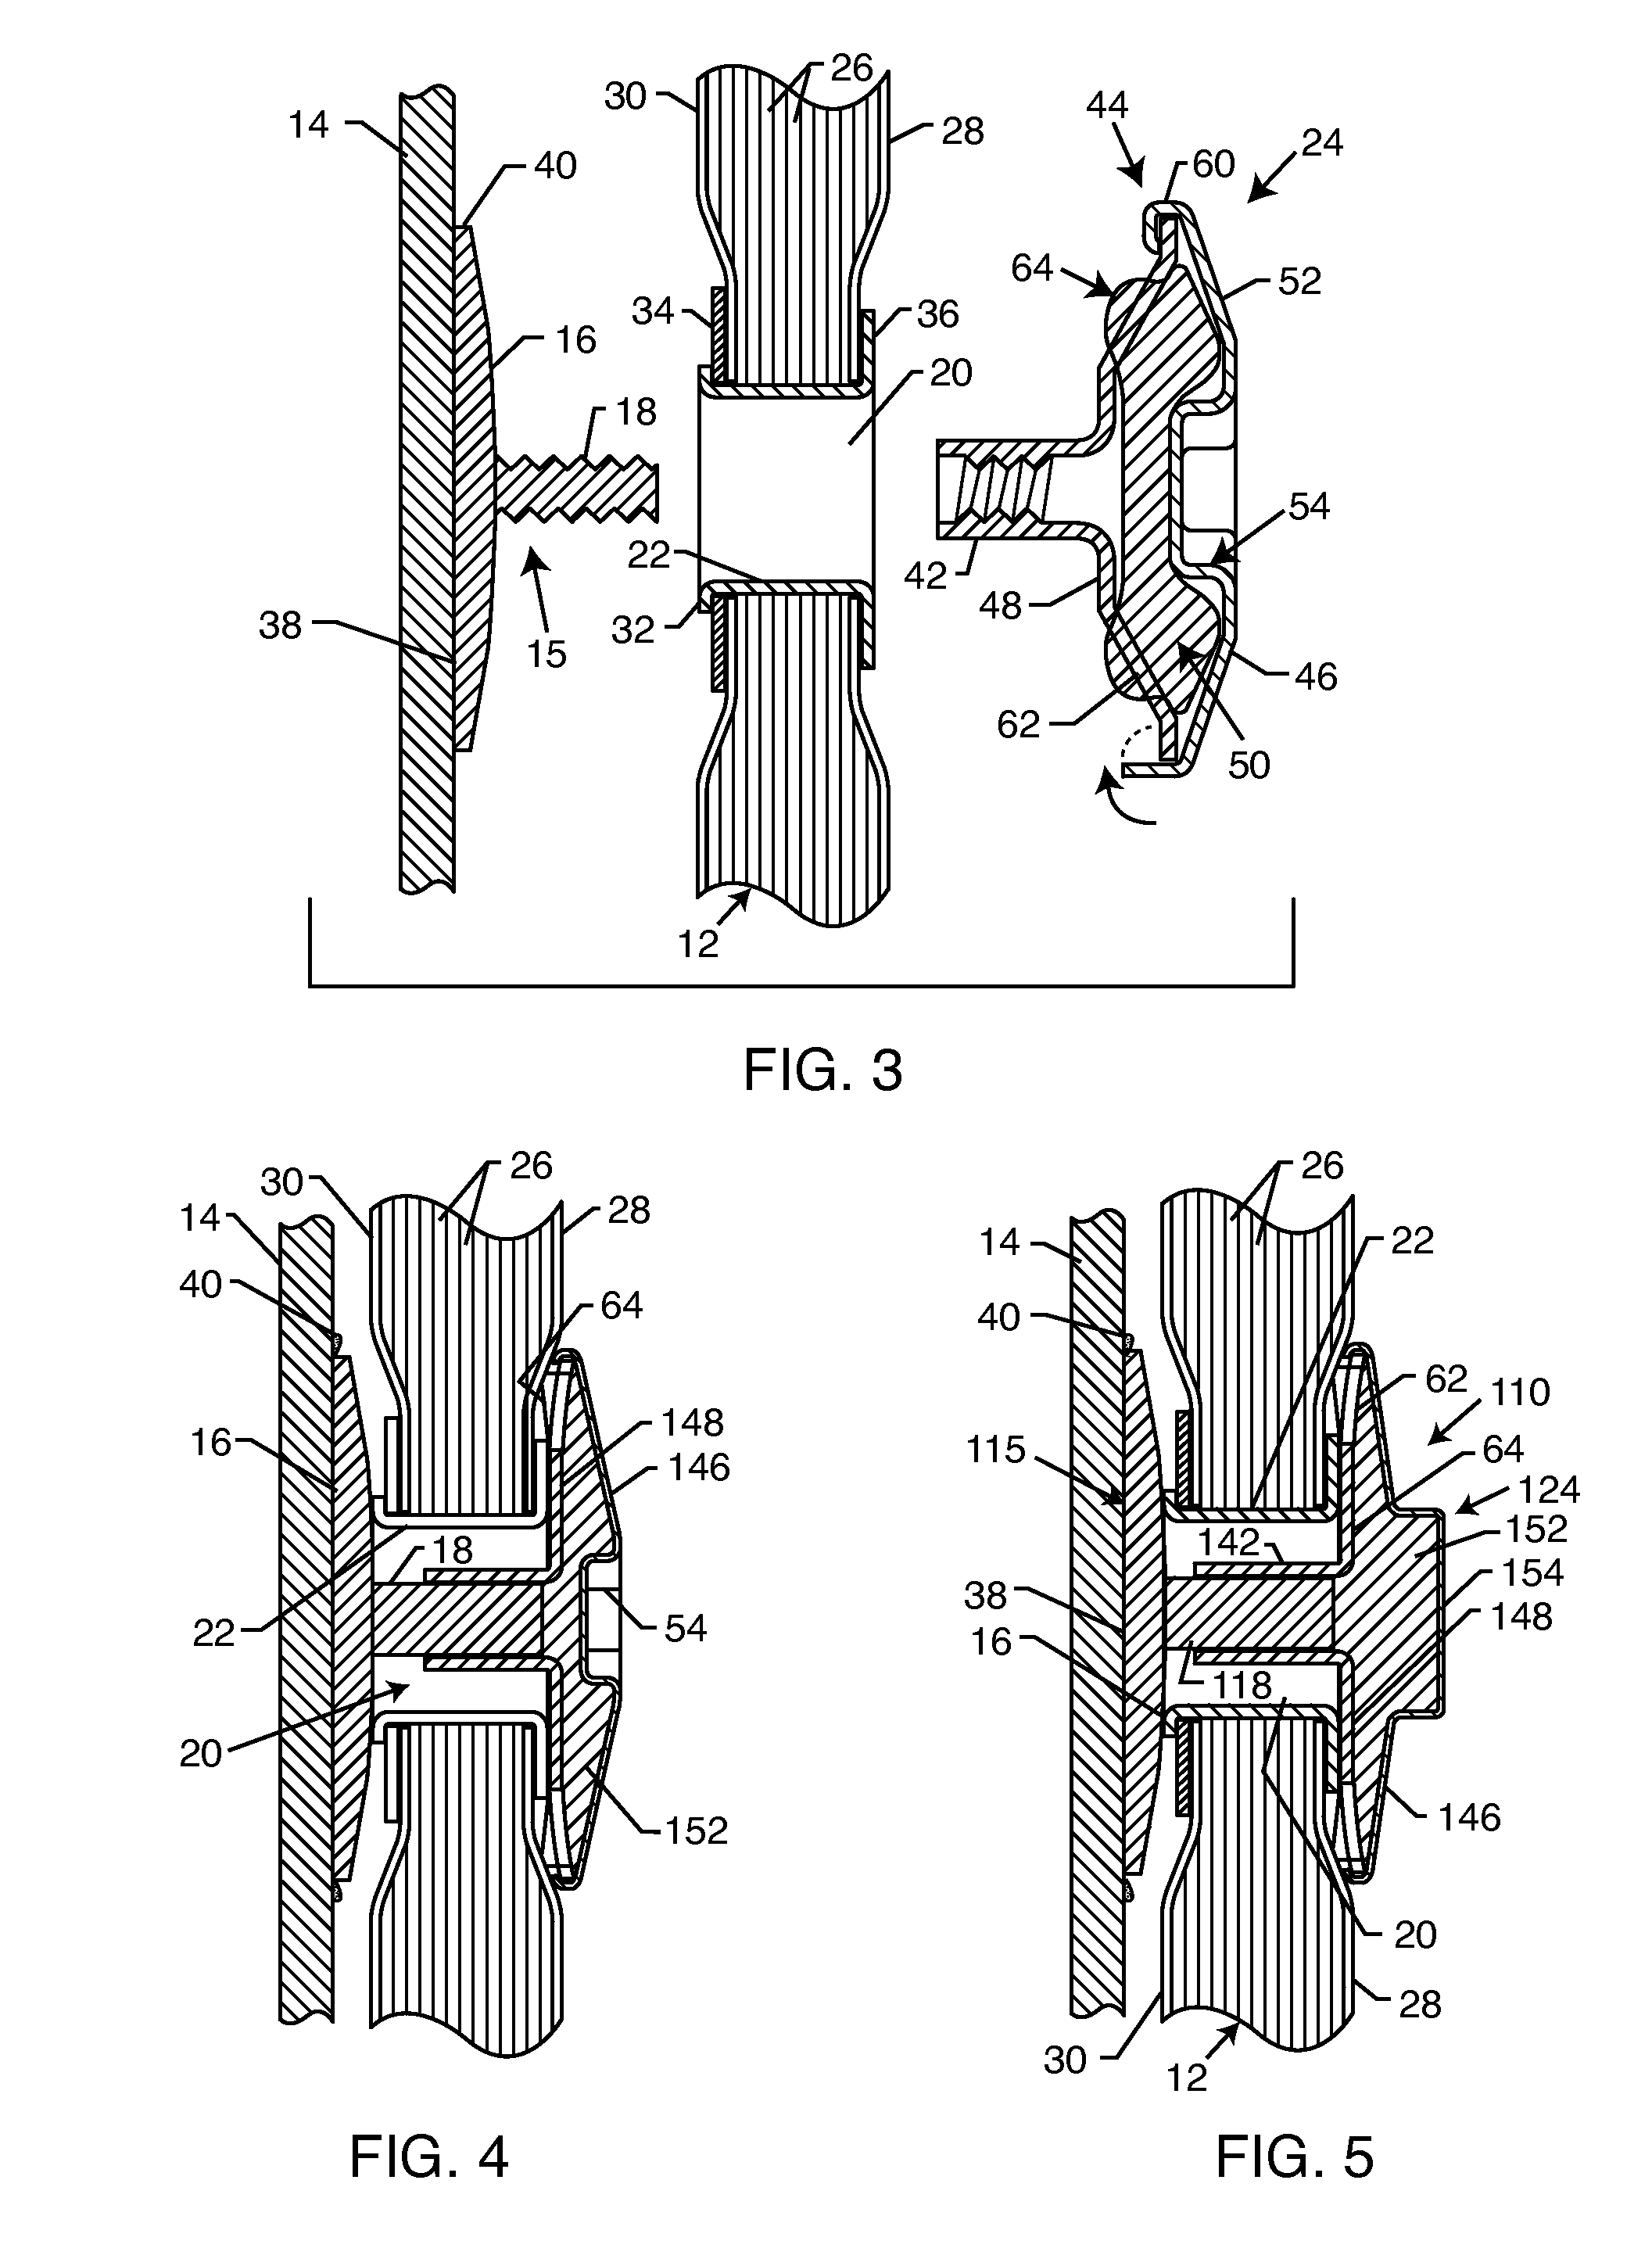 Adhesive bonded attachment assembly for an insulation blanket